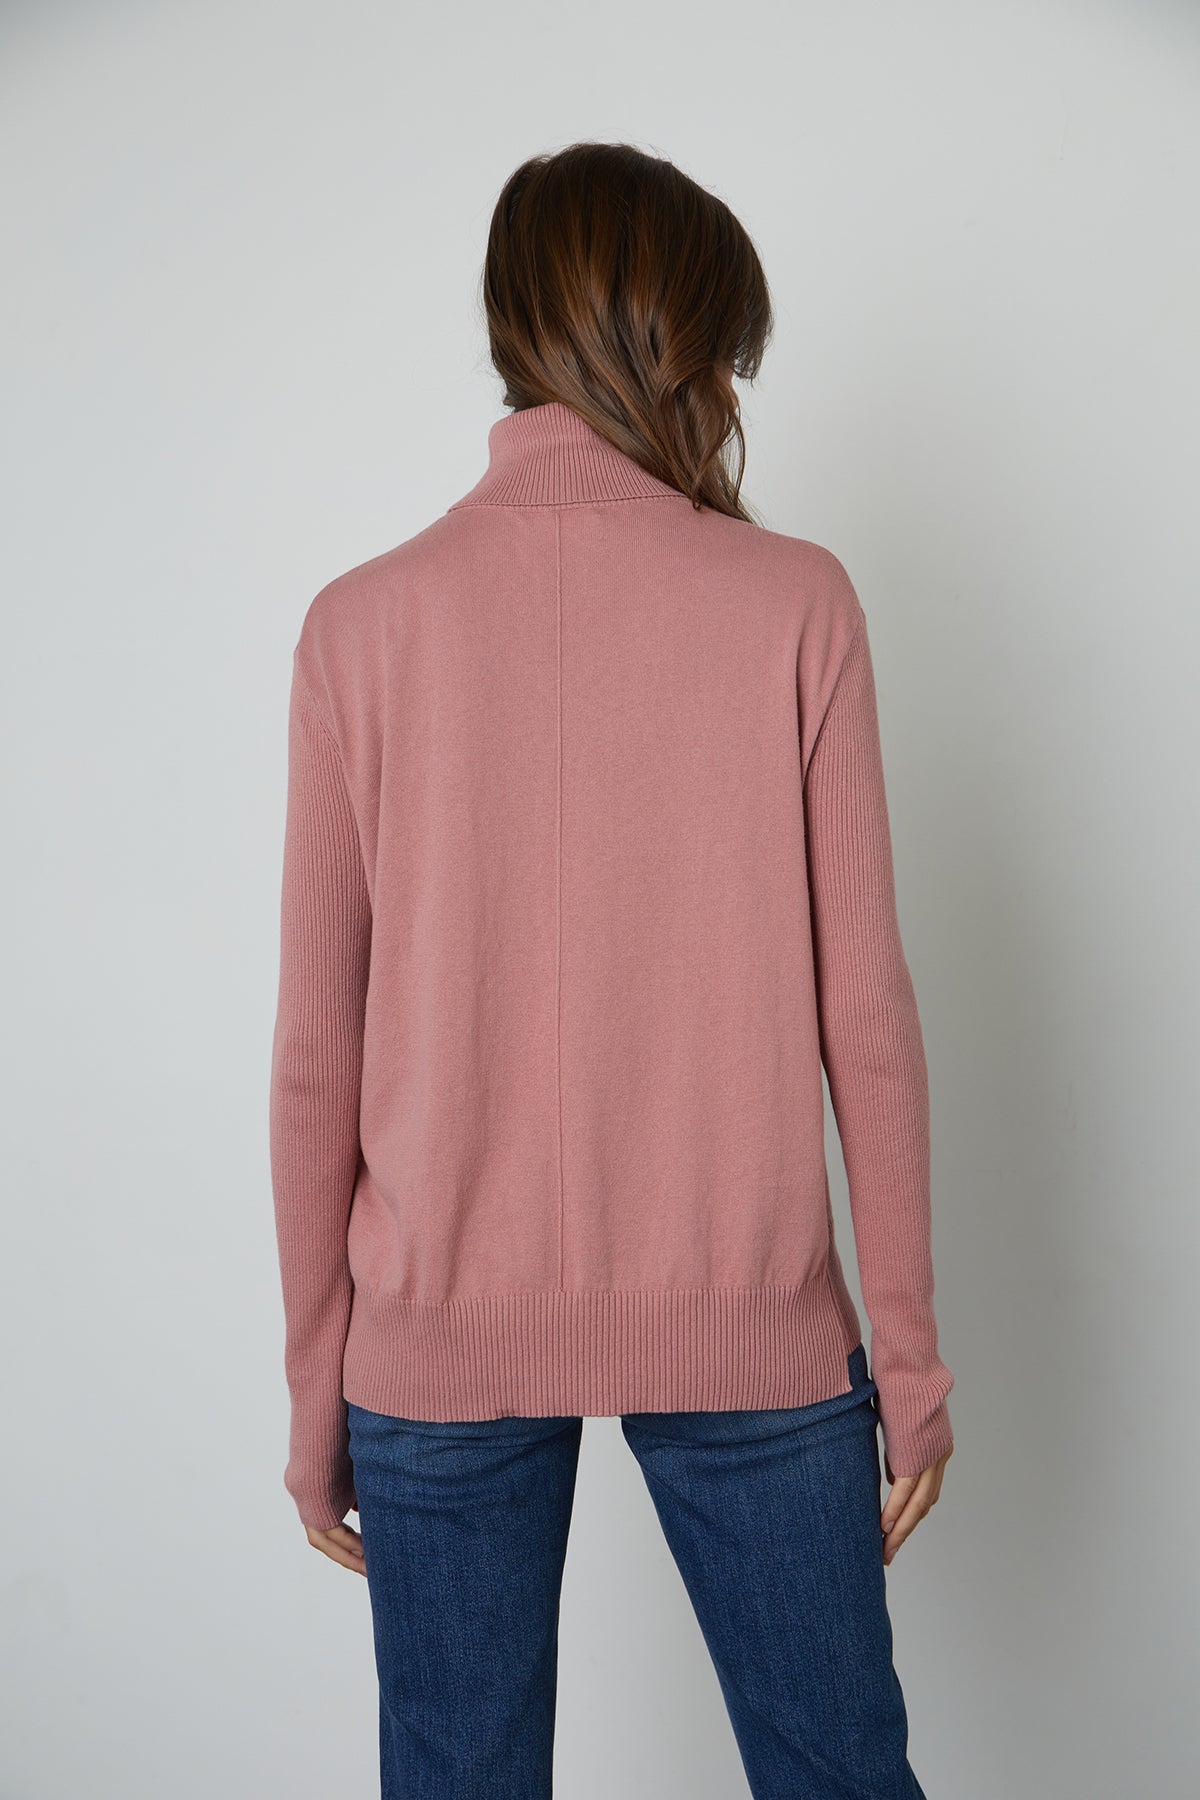 The back view of a woman wearing a Velvet by Graham & Spencer RENNY TURTLENECK SWEATER is perfect for fall layering.-25583815033025